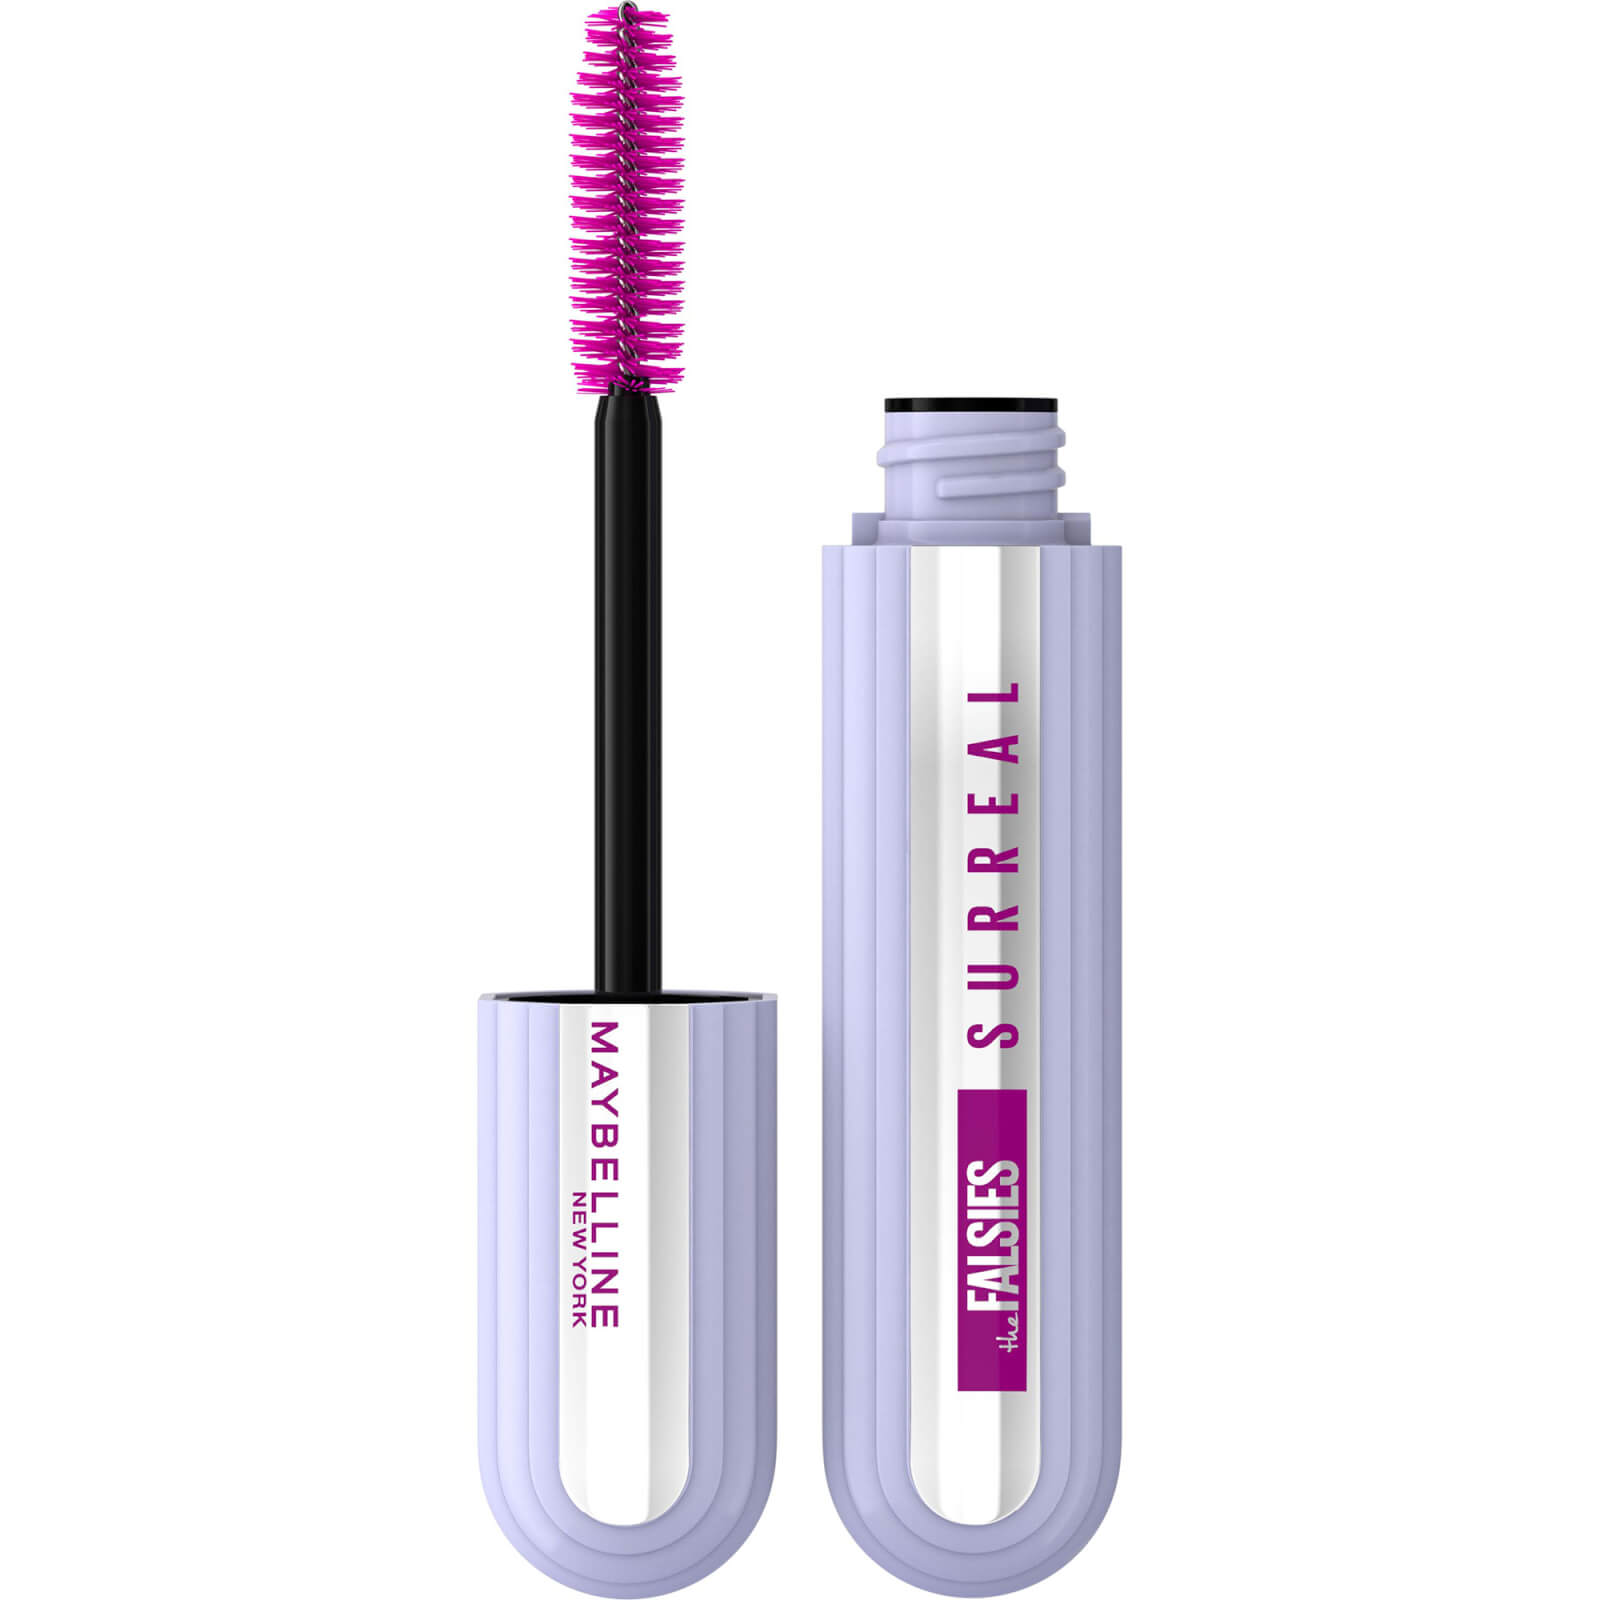 Maybelline Extension Mascara Length And Volume Long-lasting 24h Buildable Formula 10ml - Black